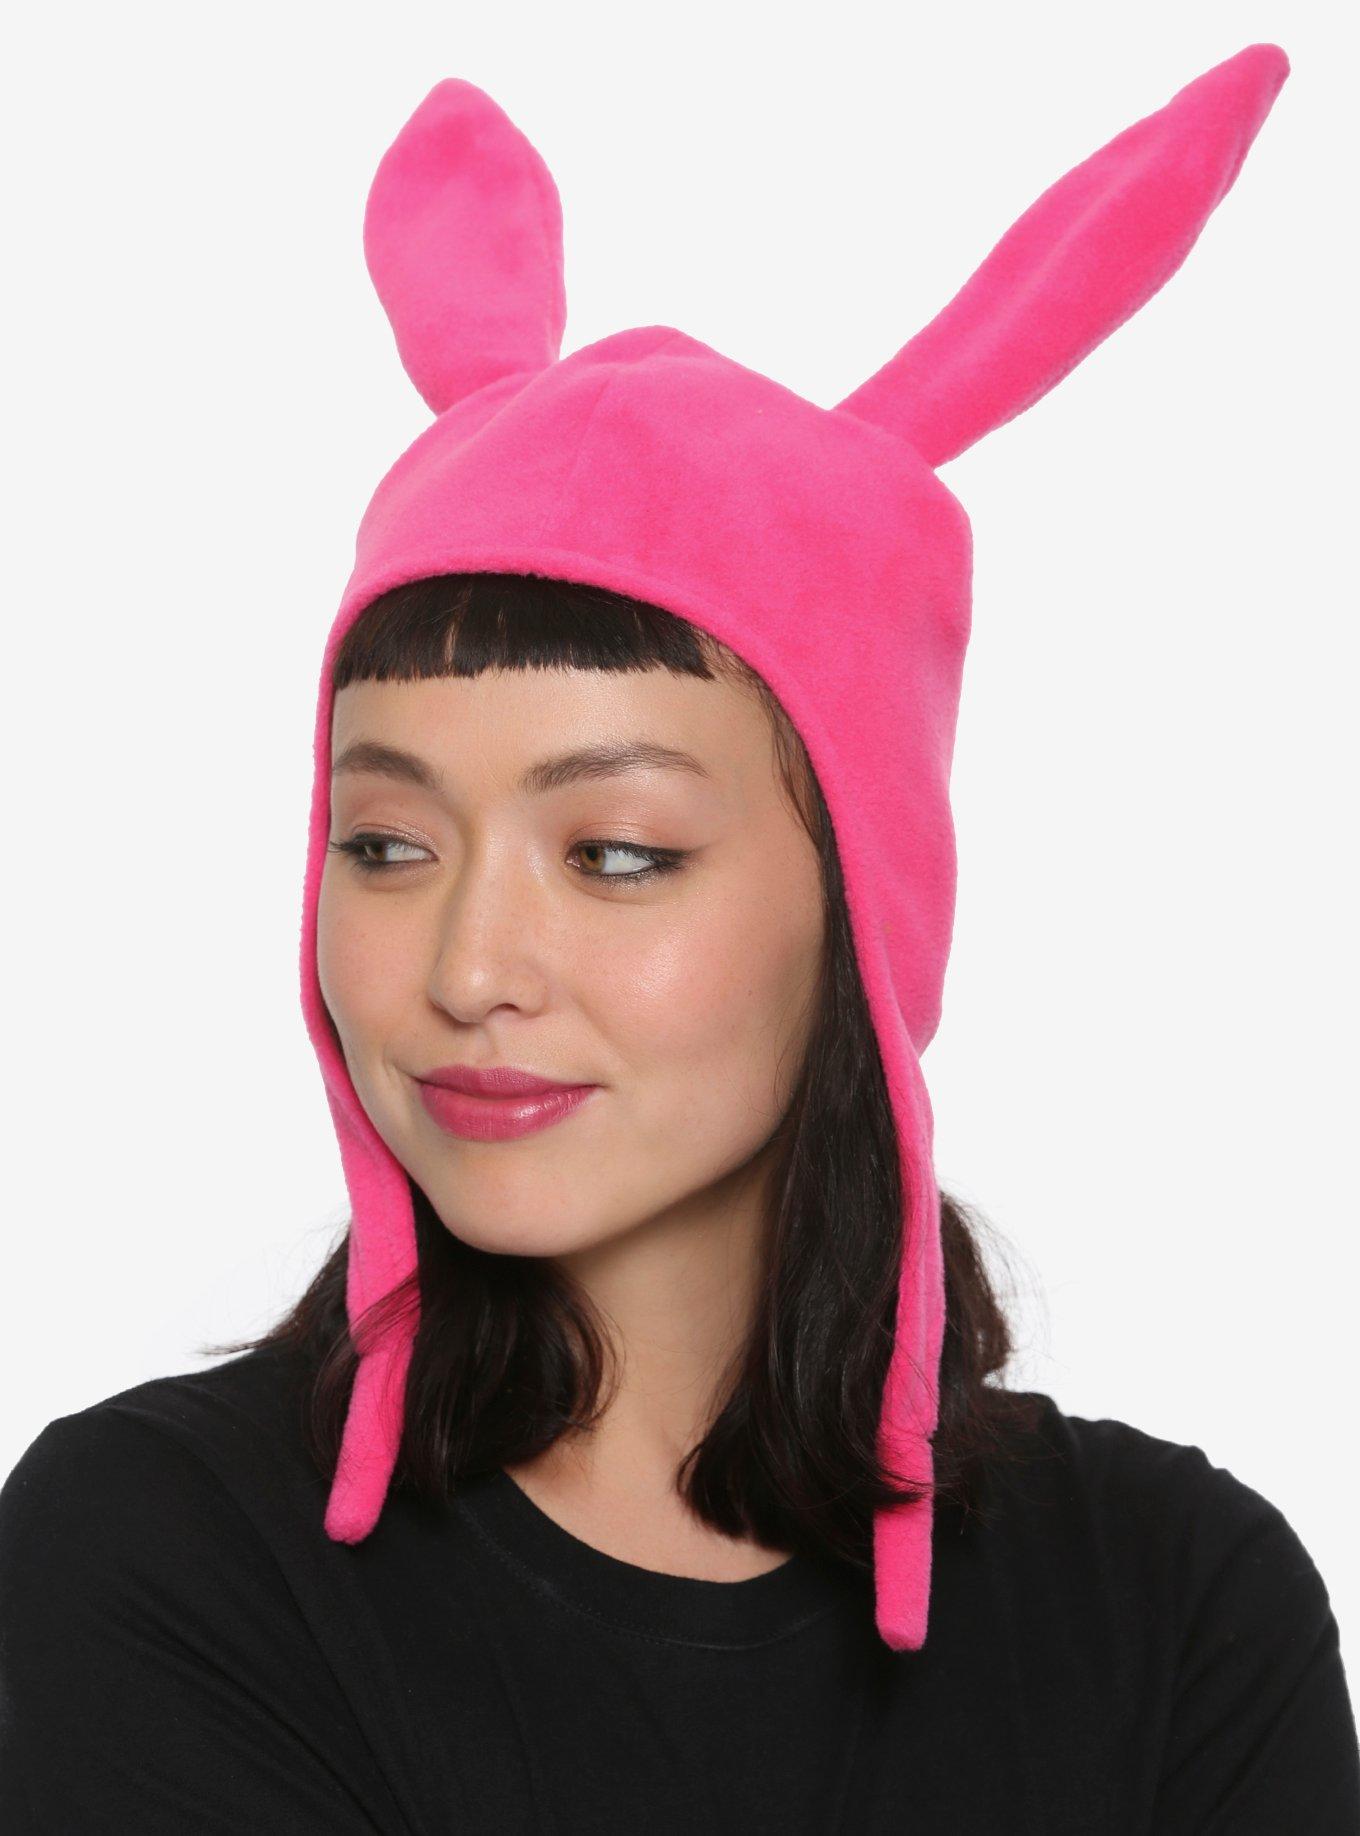 Bob's Burgers Louise Dress and Hat Adult Costume